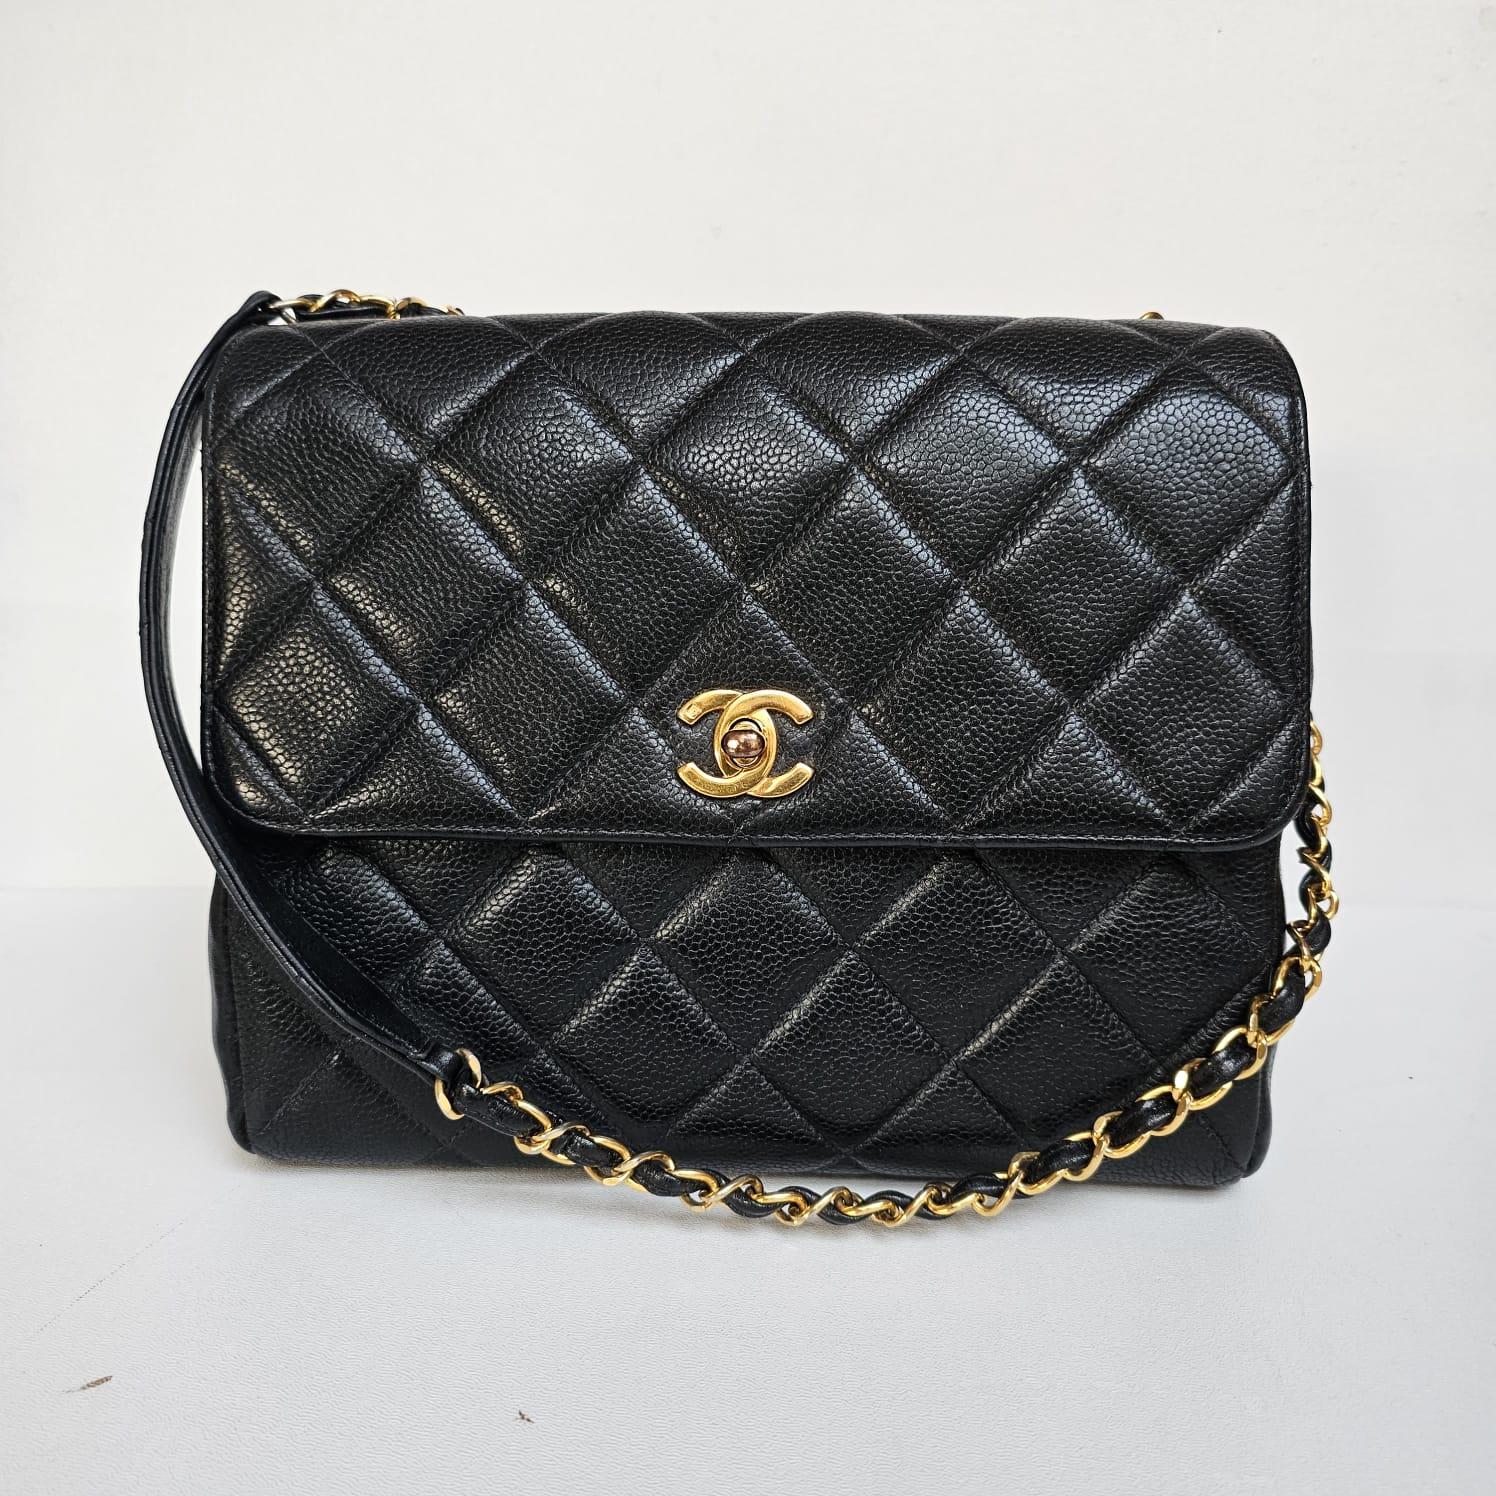 Vintage Chanel Black Caviar Quilted Square Flap Bag 11